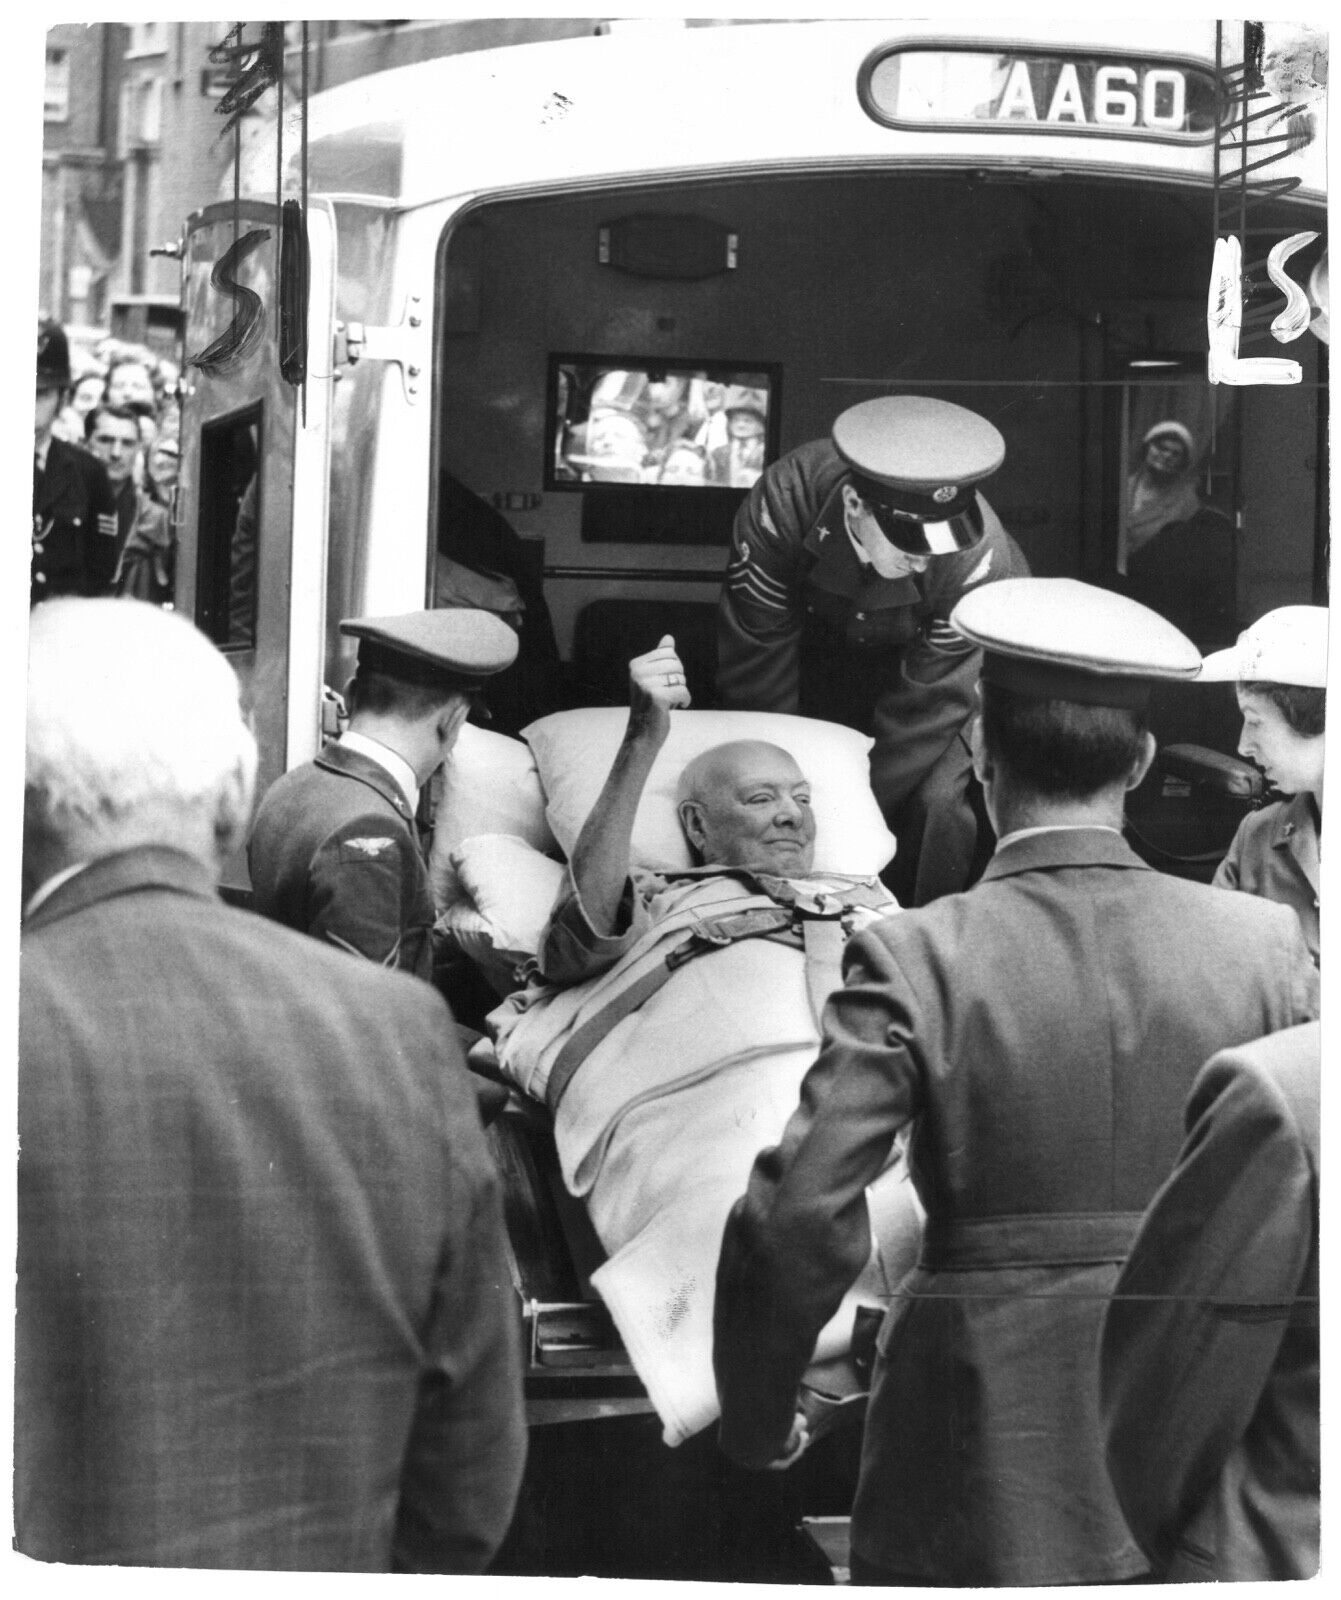 29 June 1962 press photo of Sir Winston Churchill being taken from an ambulance